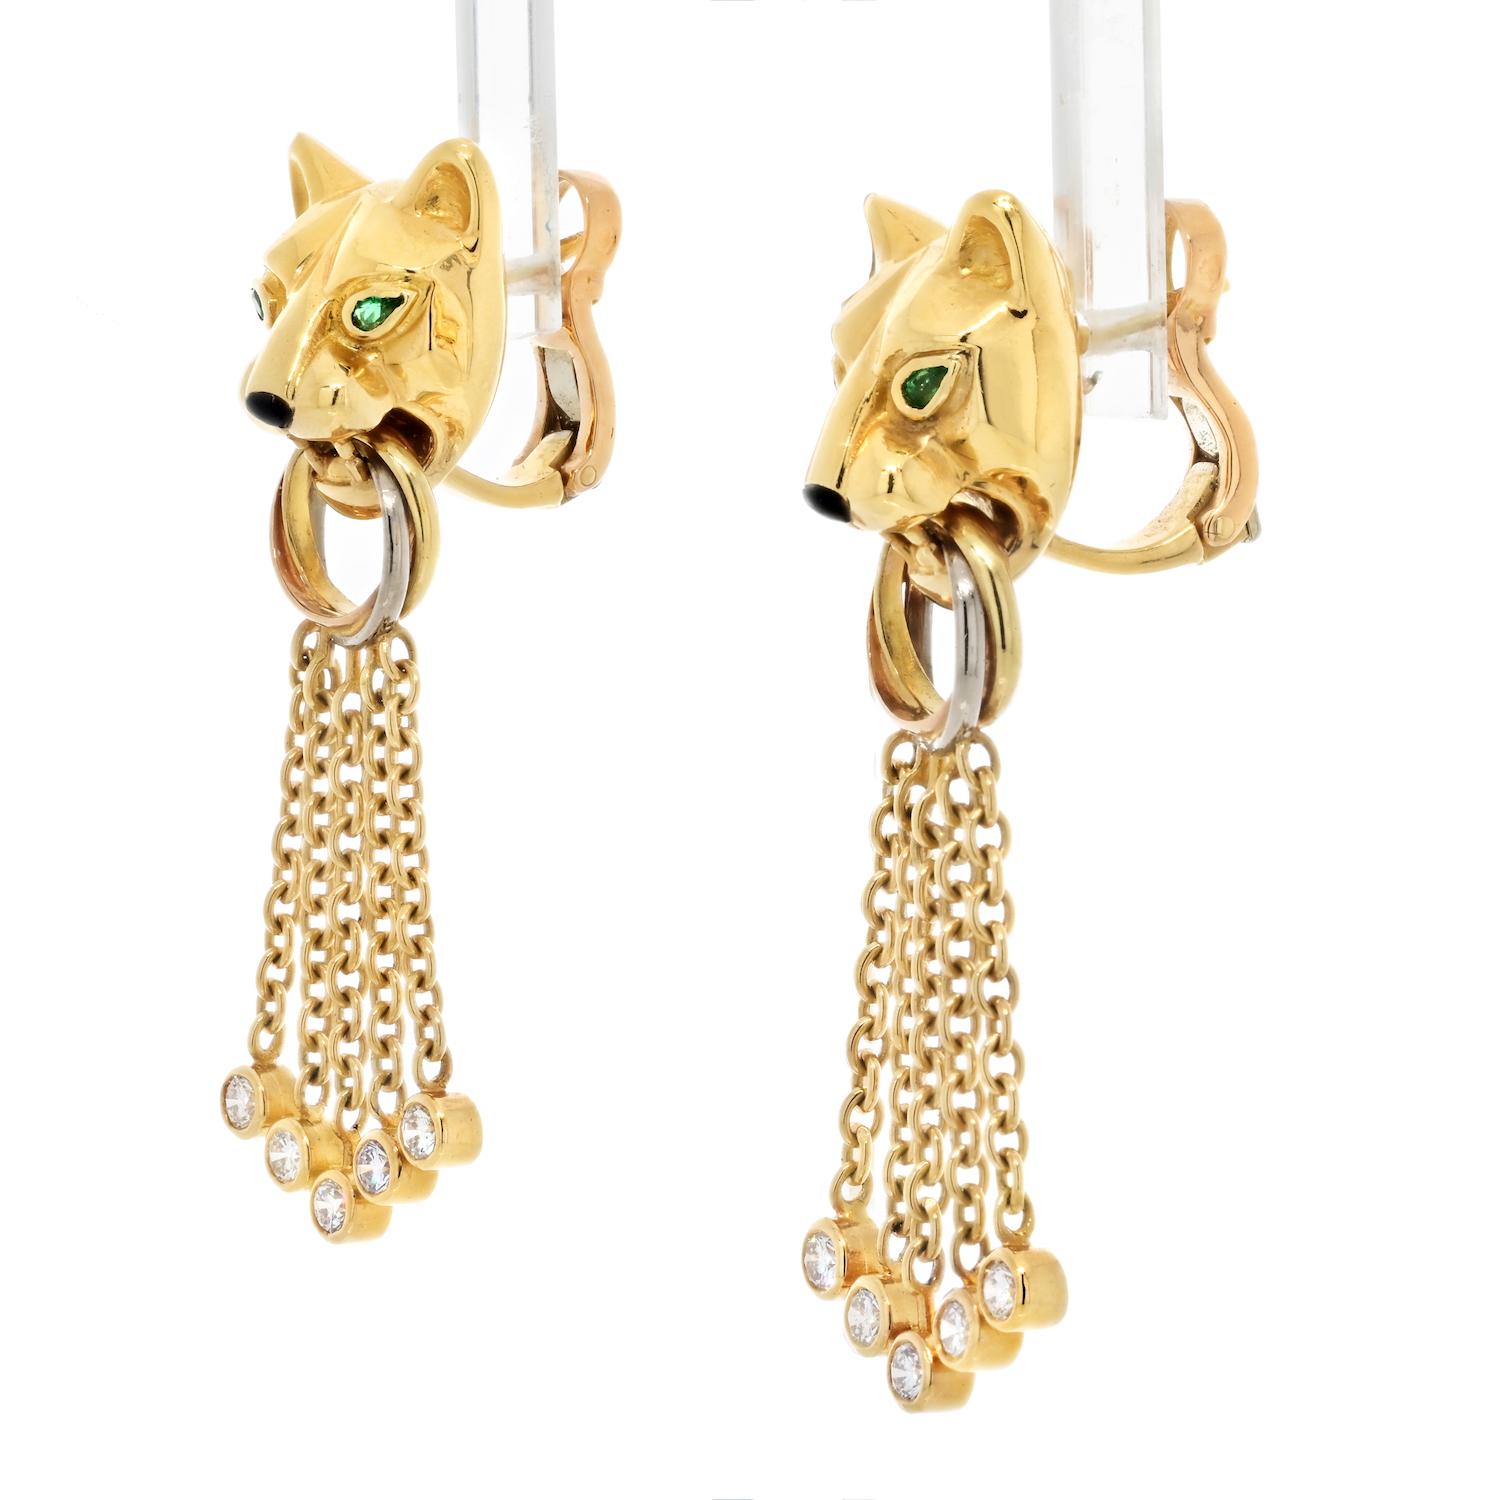 Cartier 18K Yellow Gold Diamond, Emerald, Onyx and Bead ‘Panthère’ Earrings In Excellent Condition For Sale In New York, NY